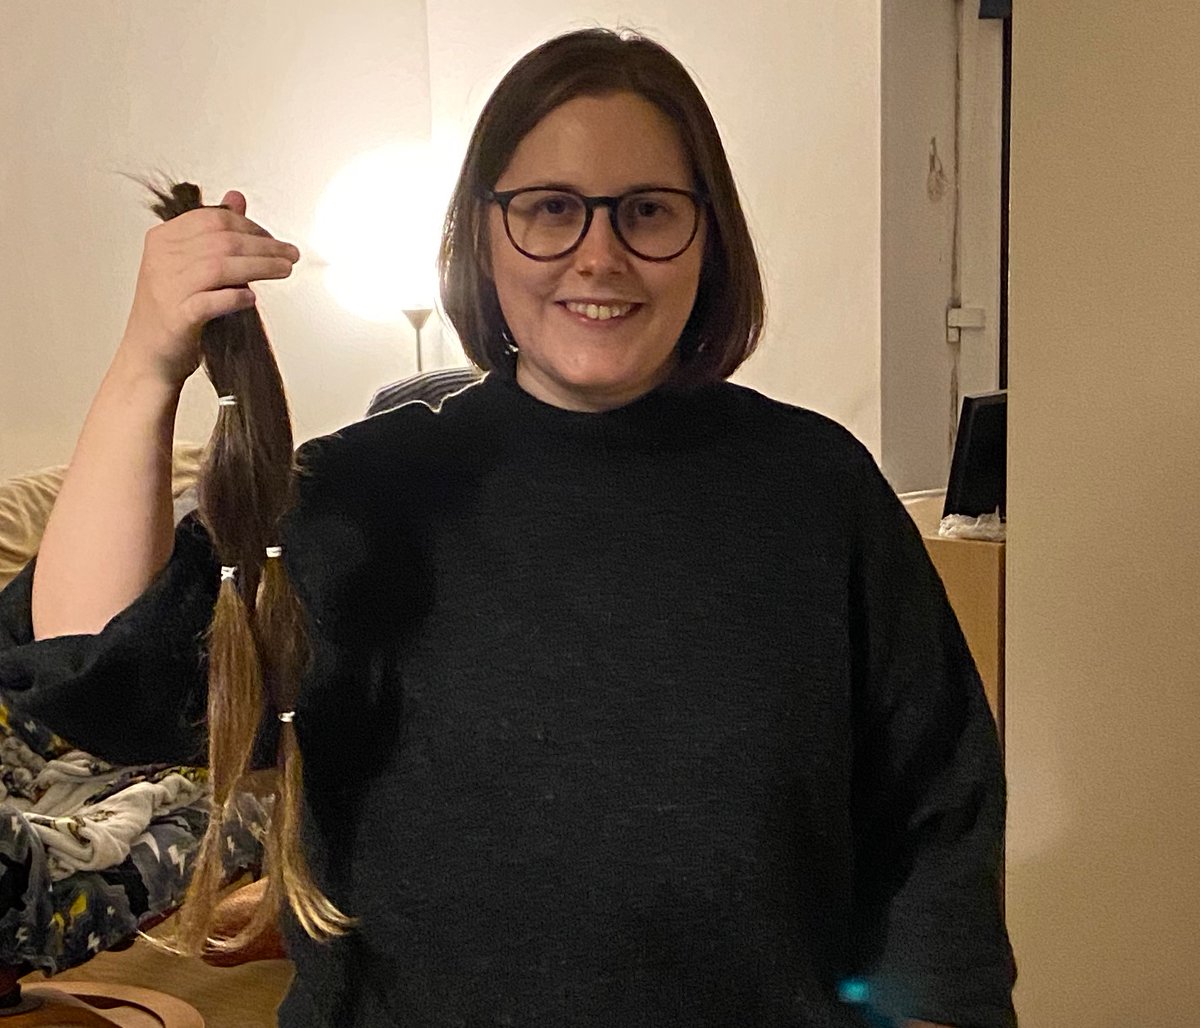 Today I cut 18.5 in (47 cm!) off of my hair for @LauraLynnHouse. The hair will be donated to @LPTrustUK to make wigs for children in need. I've set up a fundraising page for the amazing service they provide. Any donations are massively appreciated 😀 giv.i.ng/BZOm